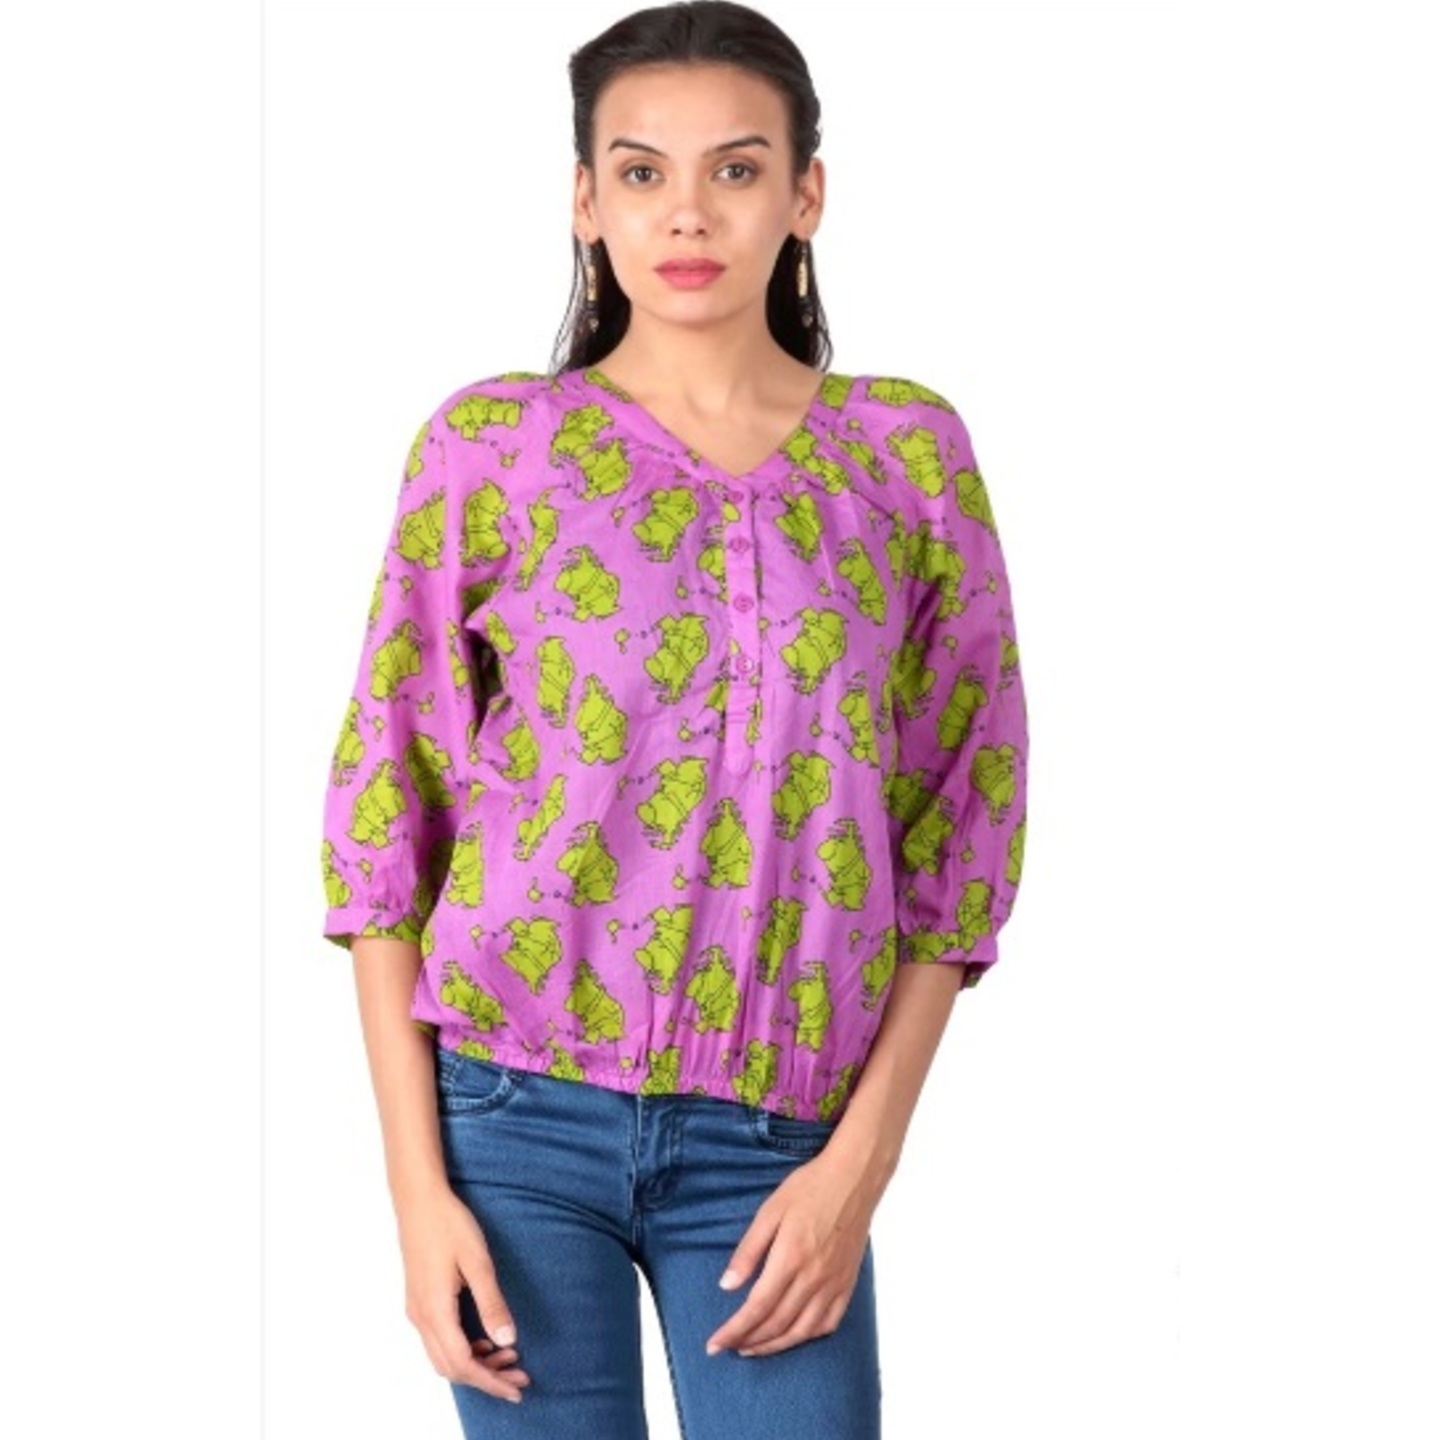 Remanika Women Top (M) - Up to Extra 35% discount